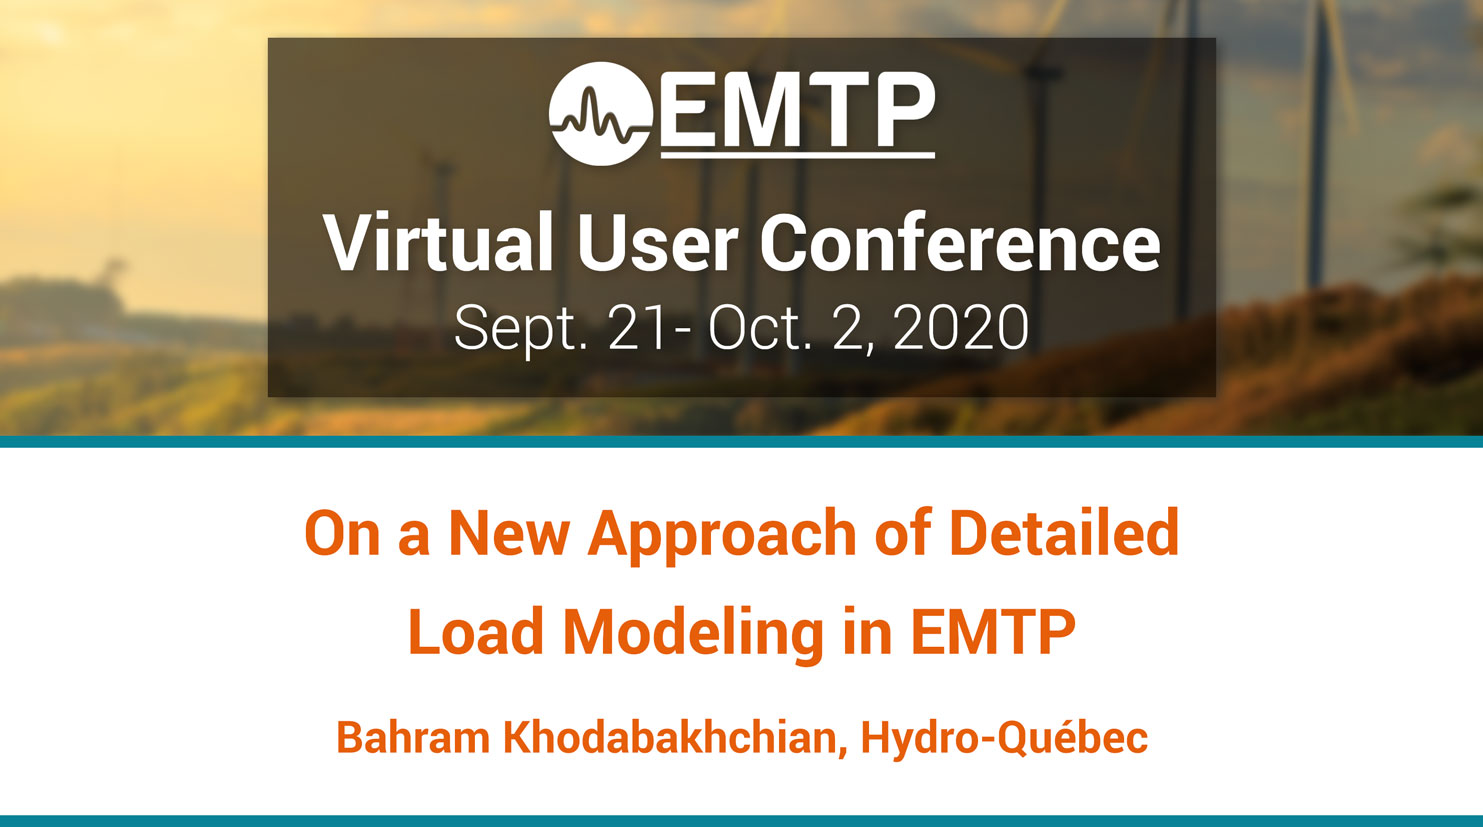 On a New Approach of Detailed Load Modeling in EMTP